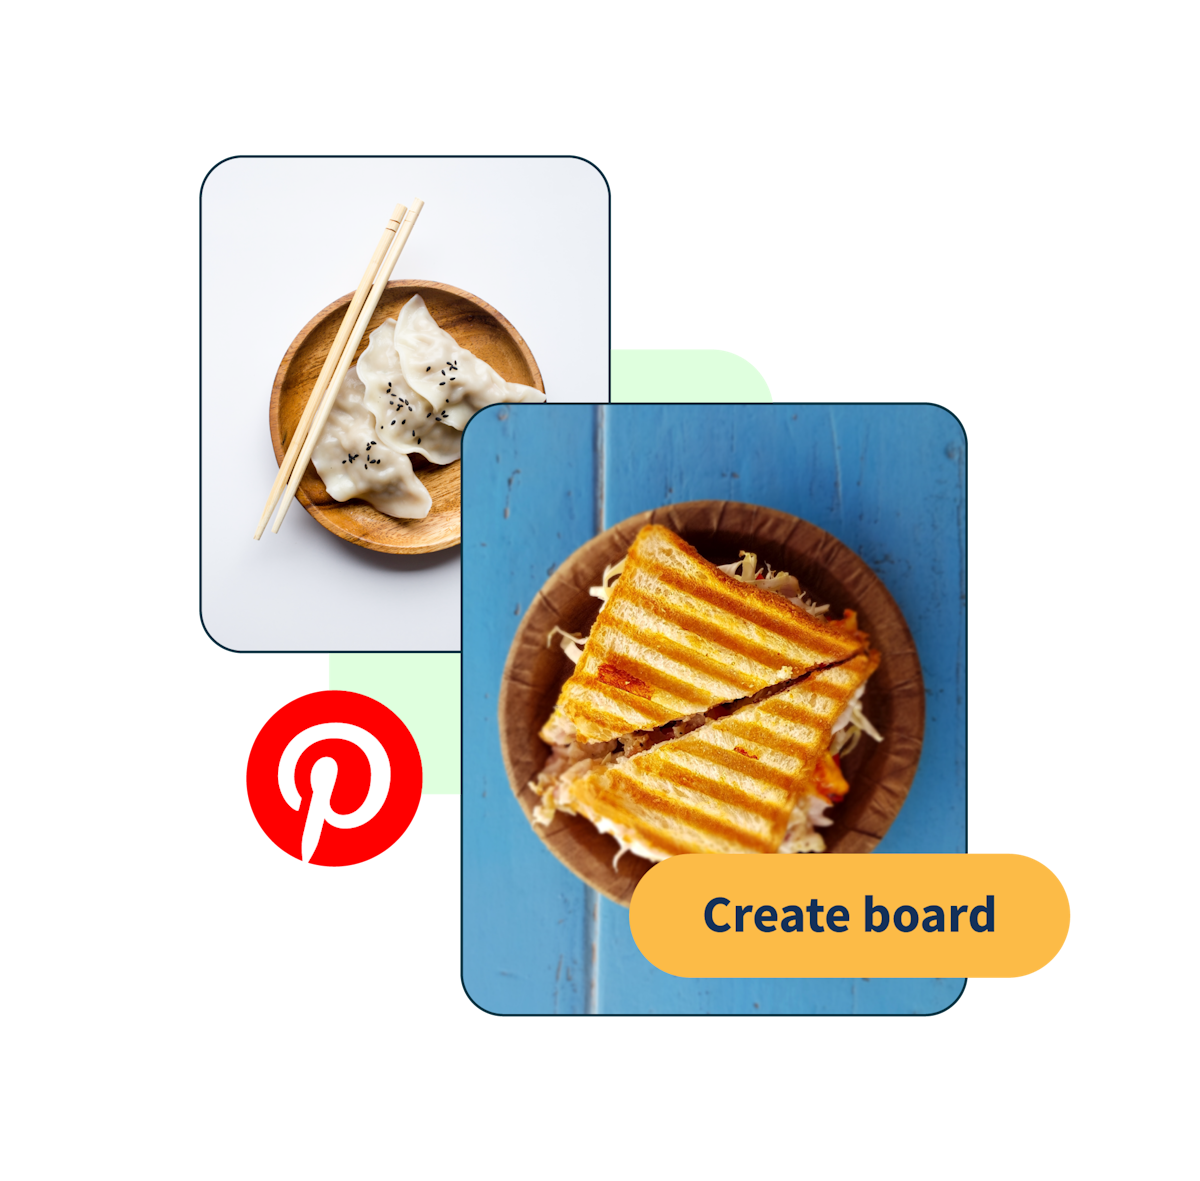 picture of a sandwich and dumplings, with a button popup saying "create board"